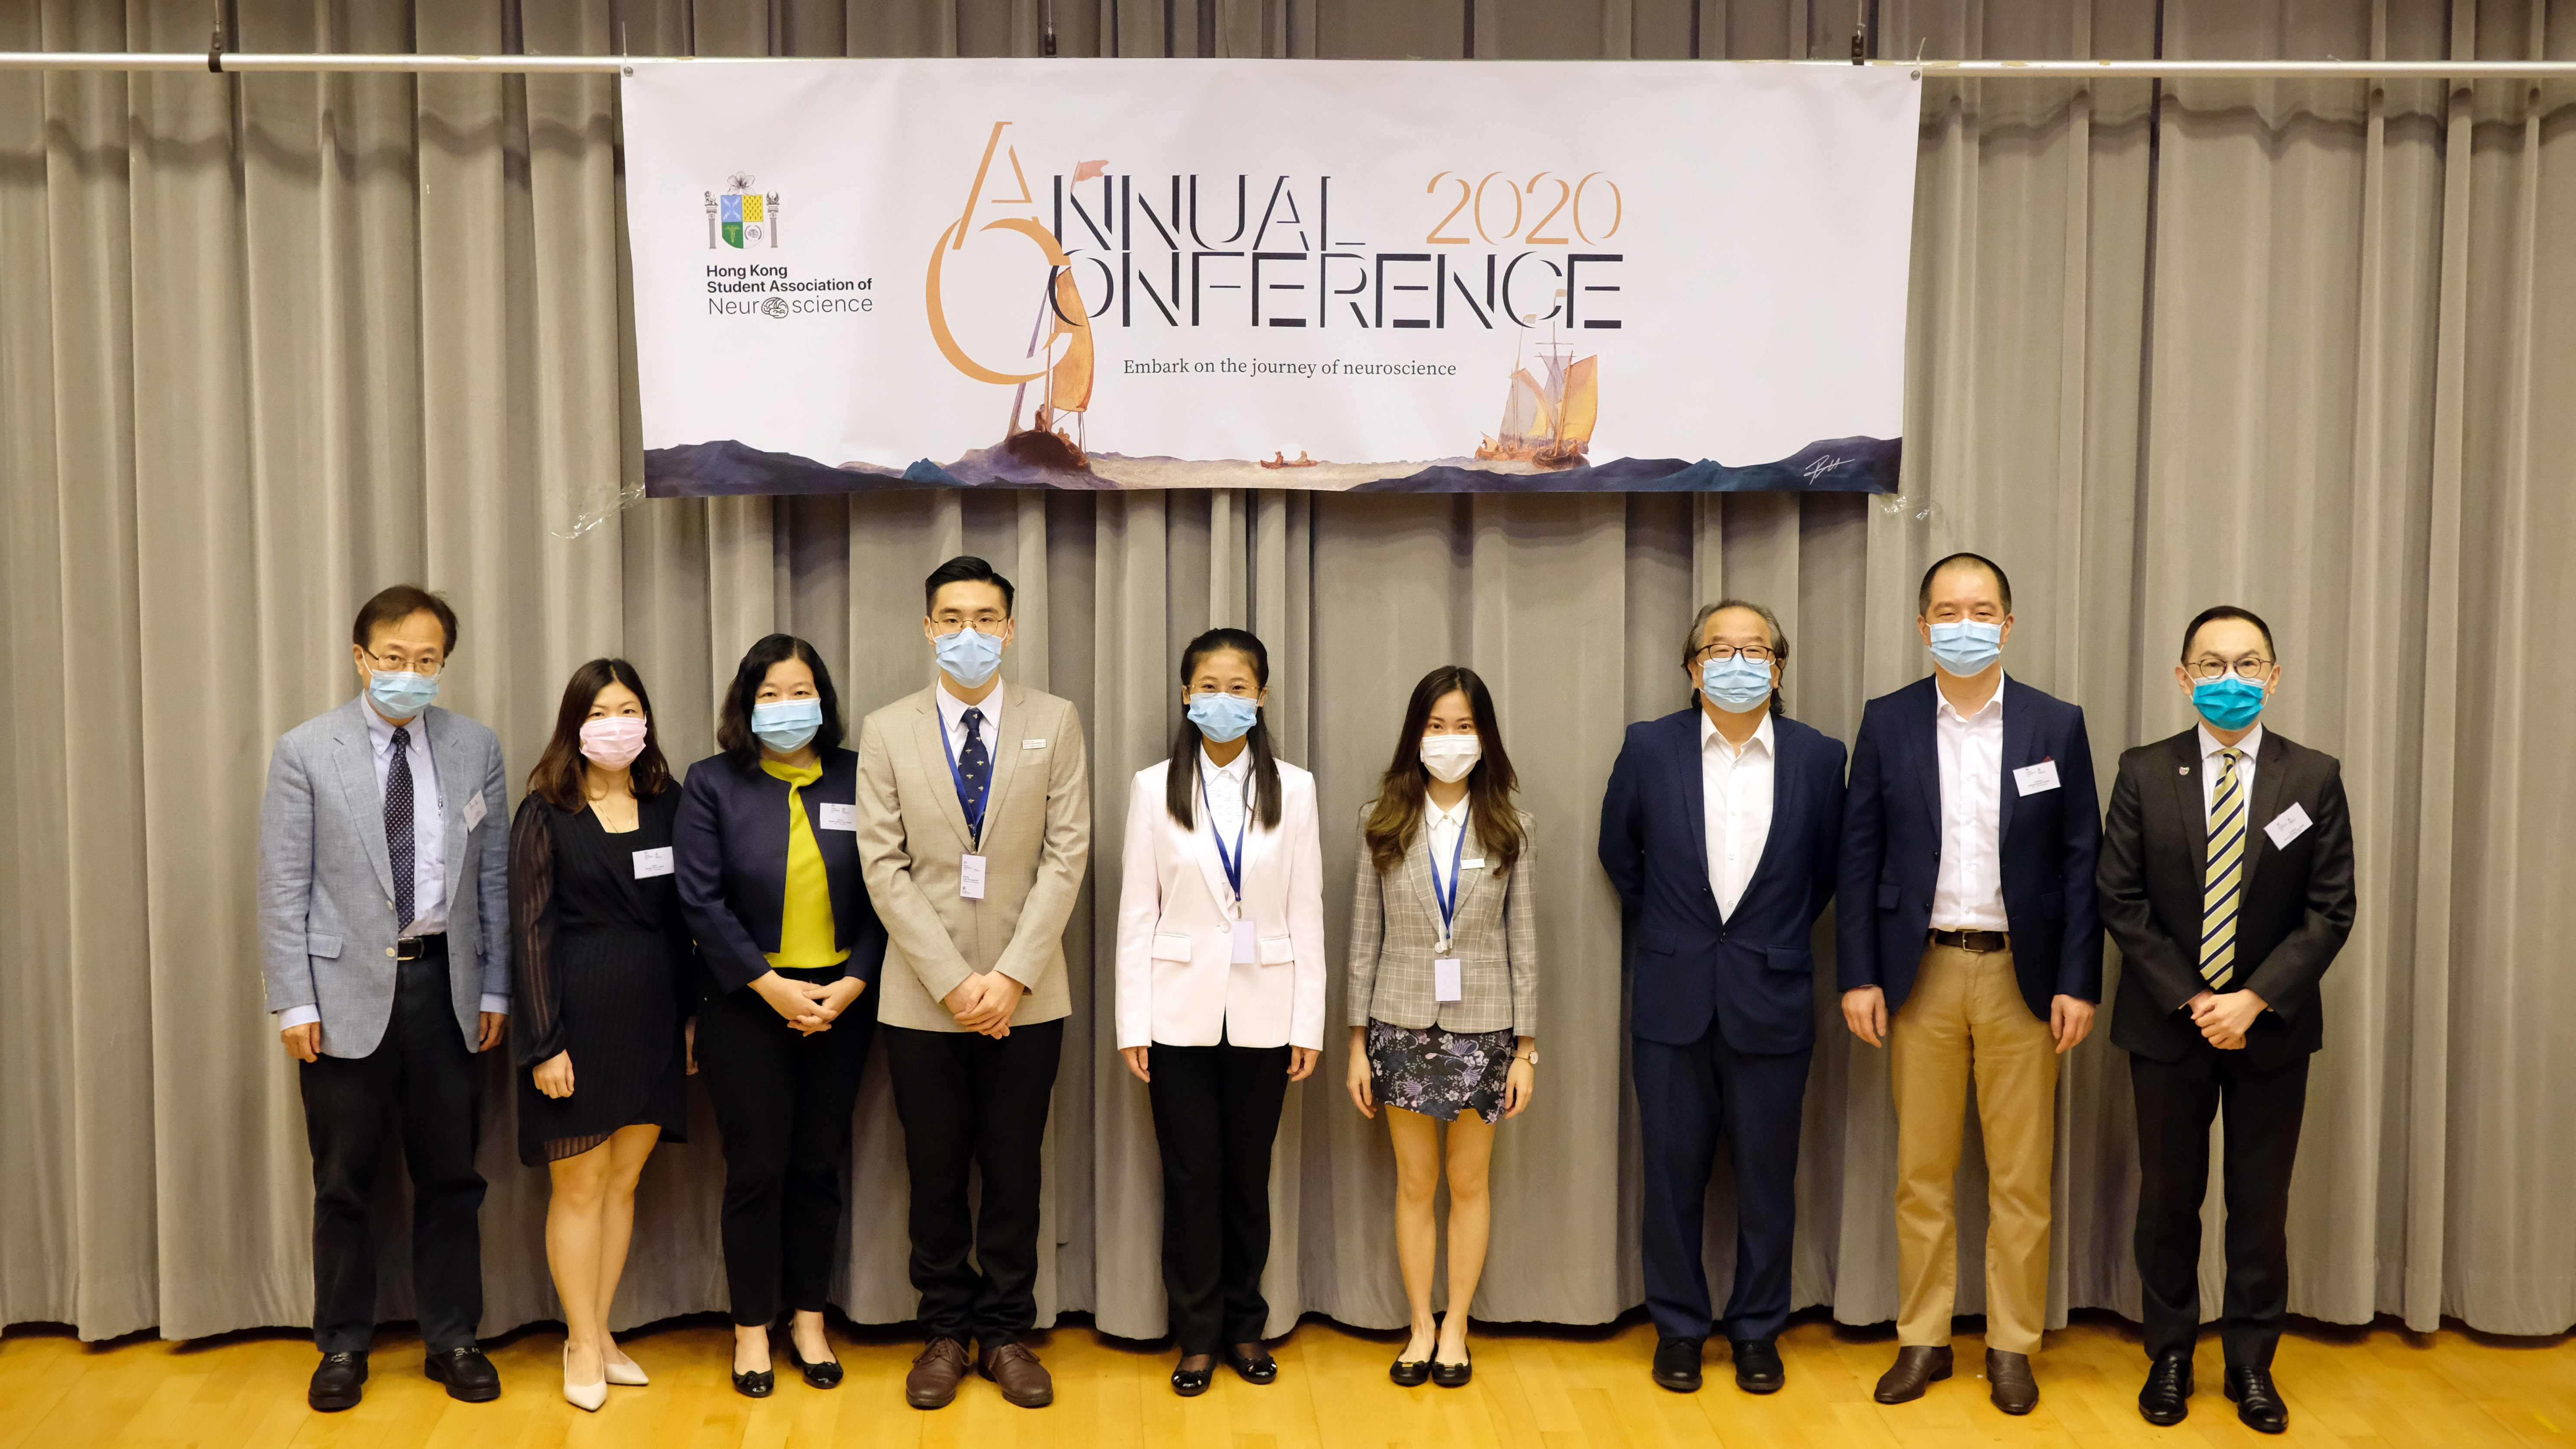 Queenie Wong (5th from the left) and speakers of the first Annual Conference hosted by the Hong Kong Student Association of Neuroscience.